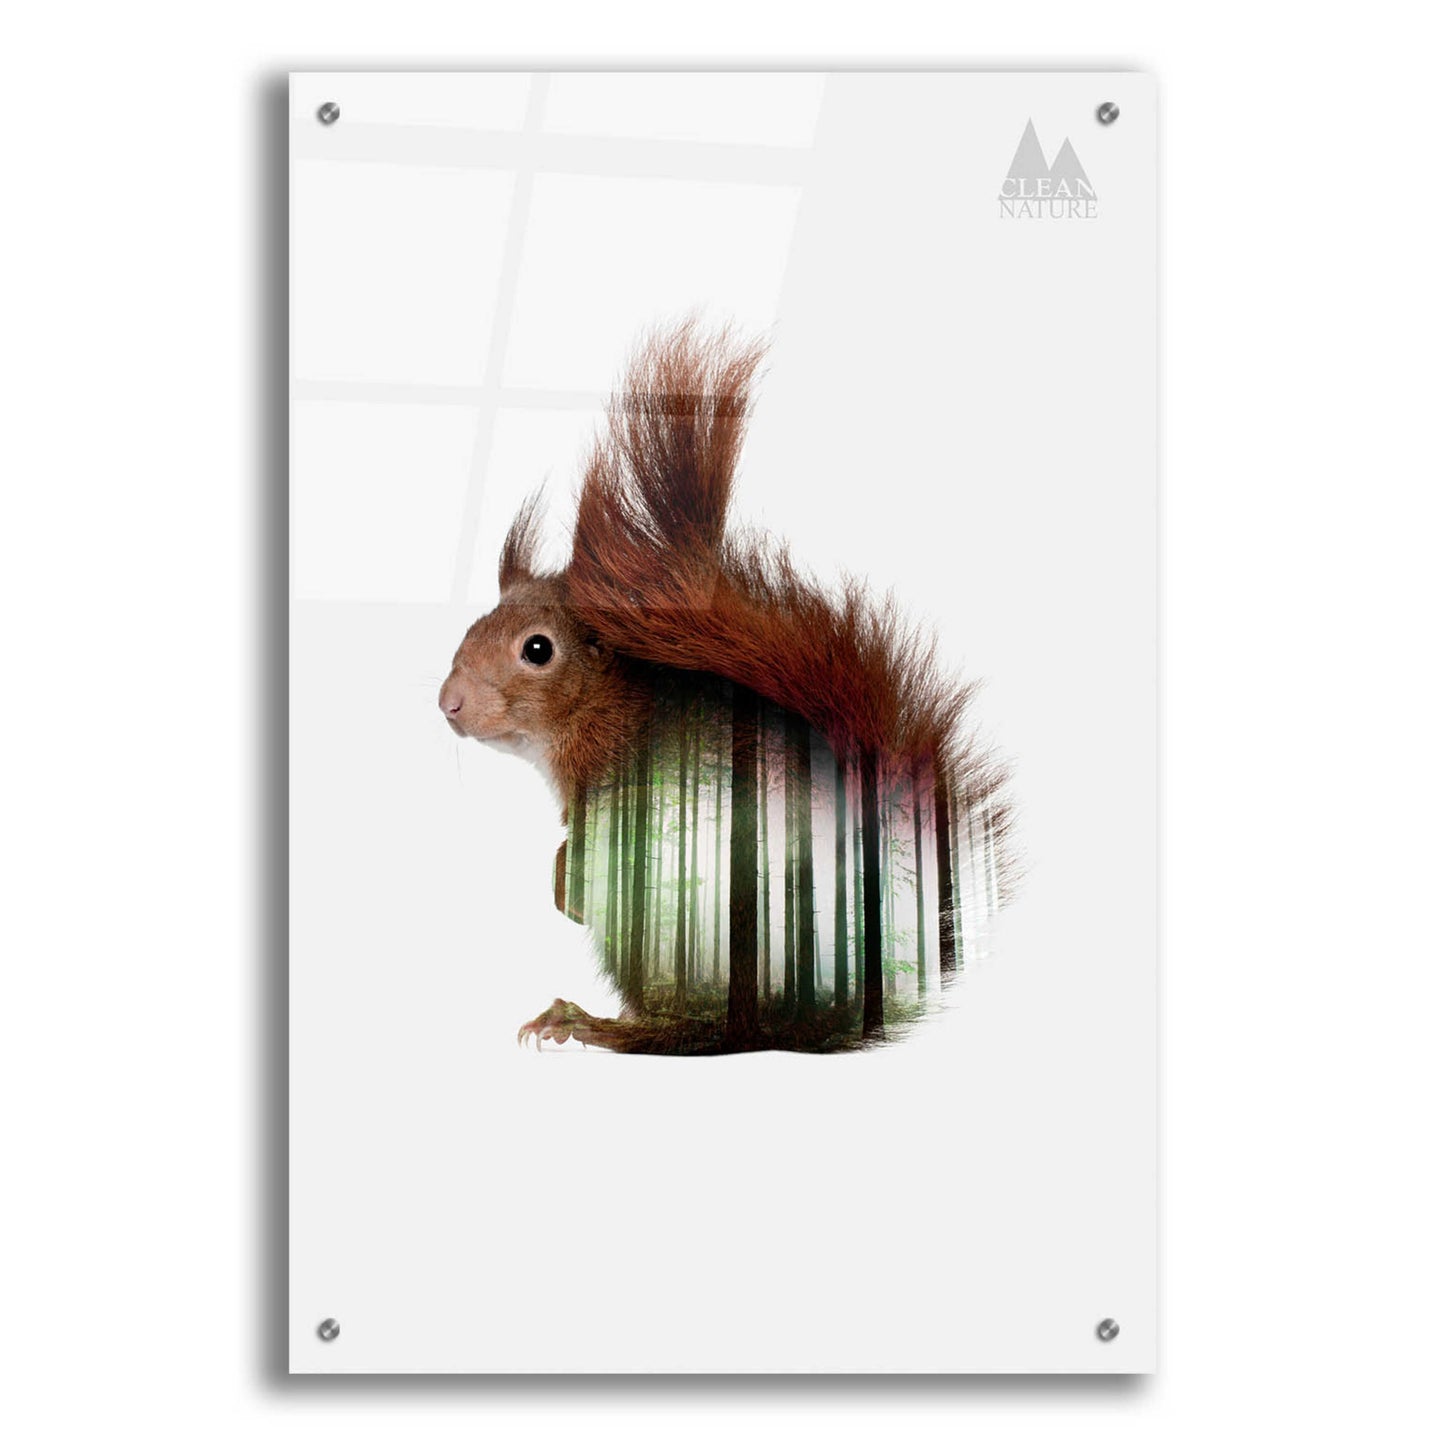 Epic Art 'Squirrel' by Clean Nature, Acrylic Glass Wall Art,24x36